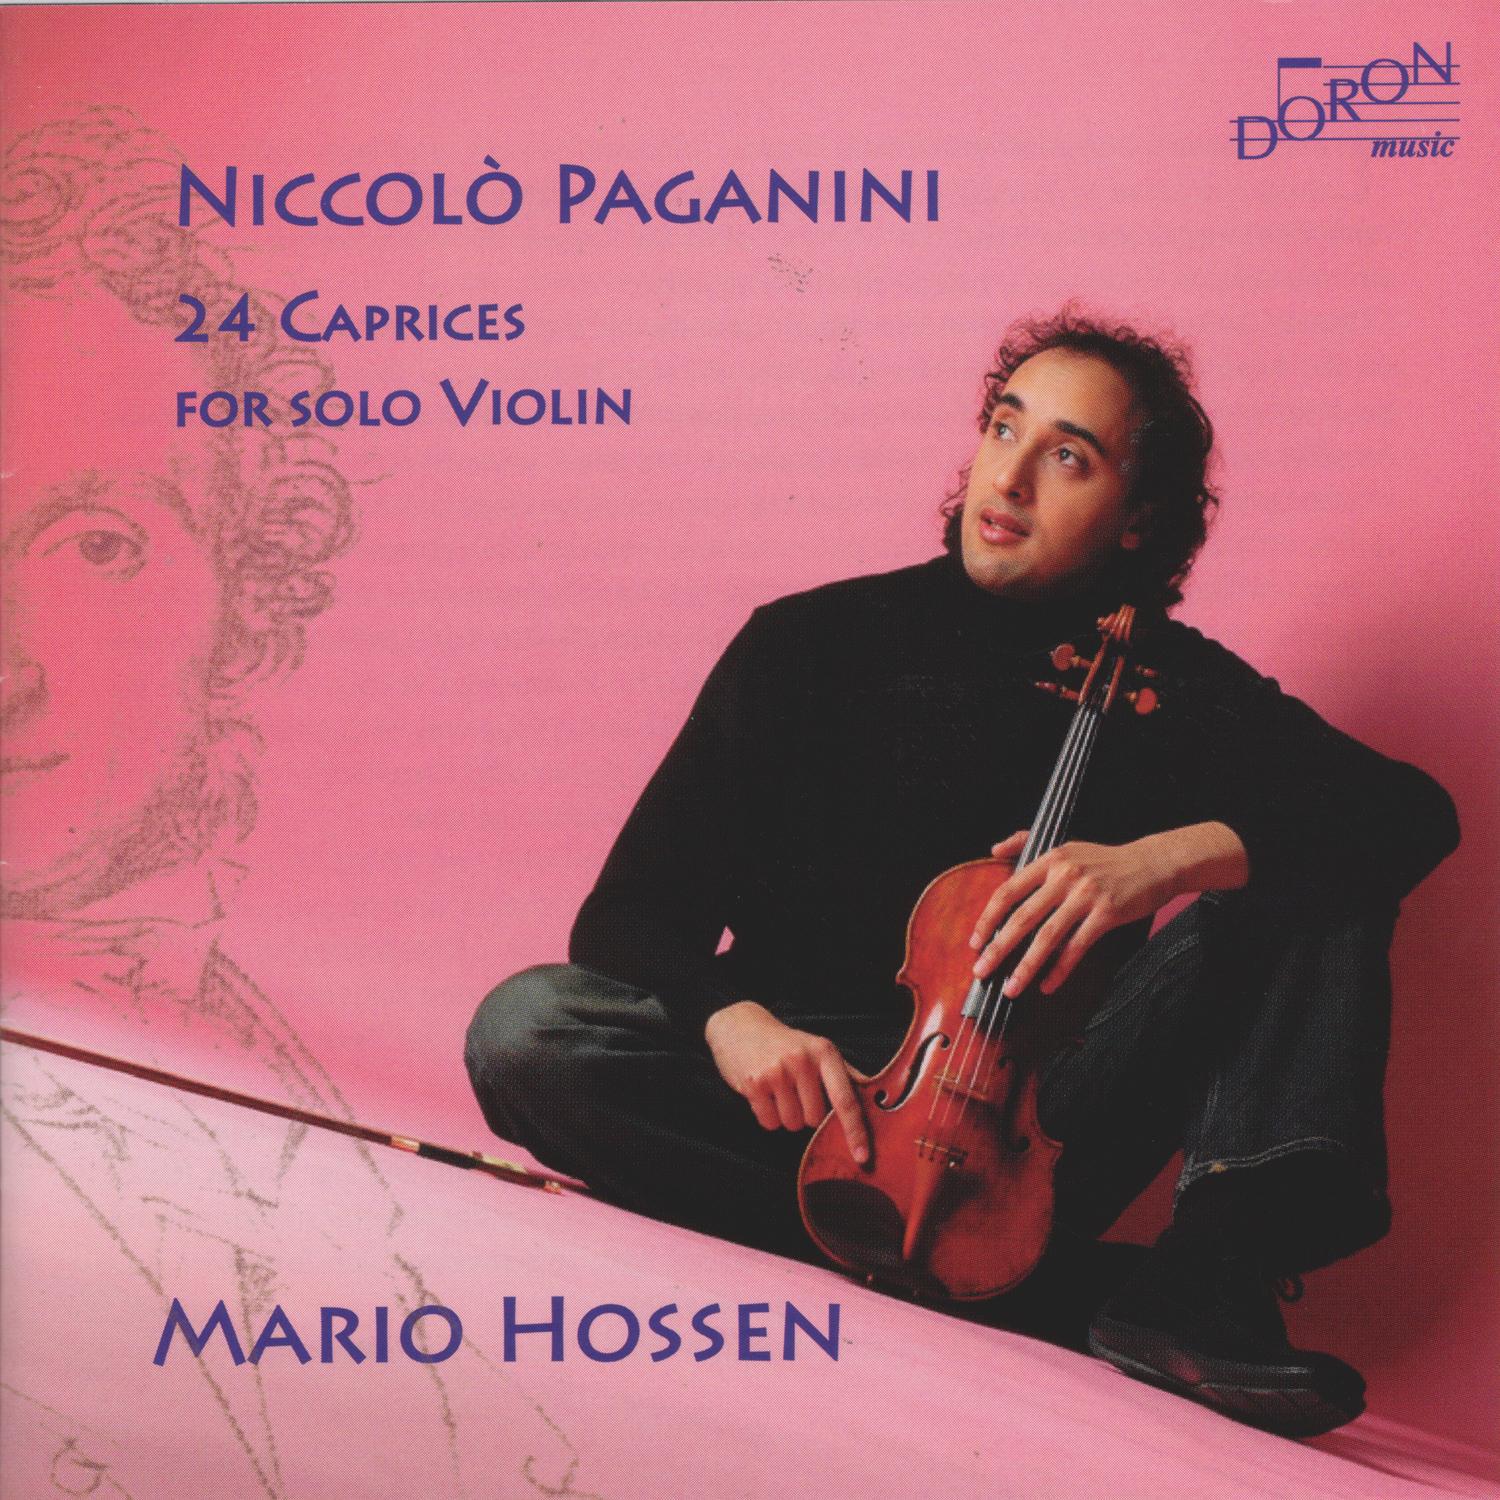 24 Caprices for Solo Violin, Op. 1: IV. Maestoso